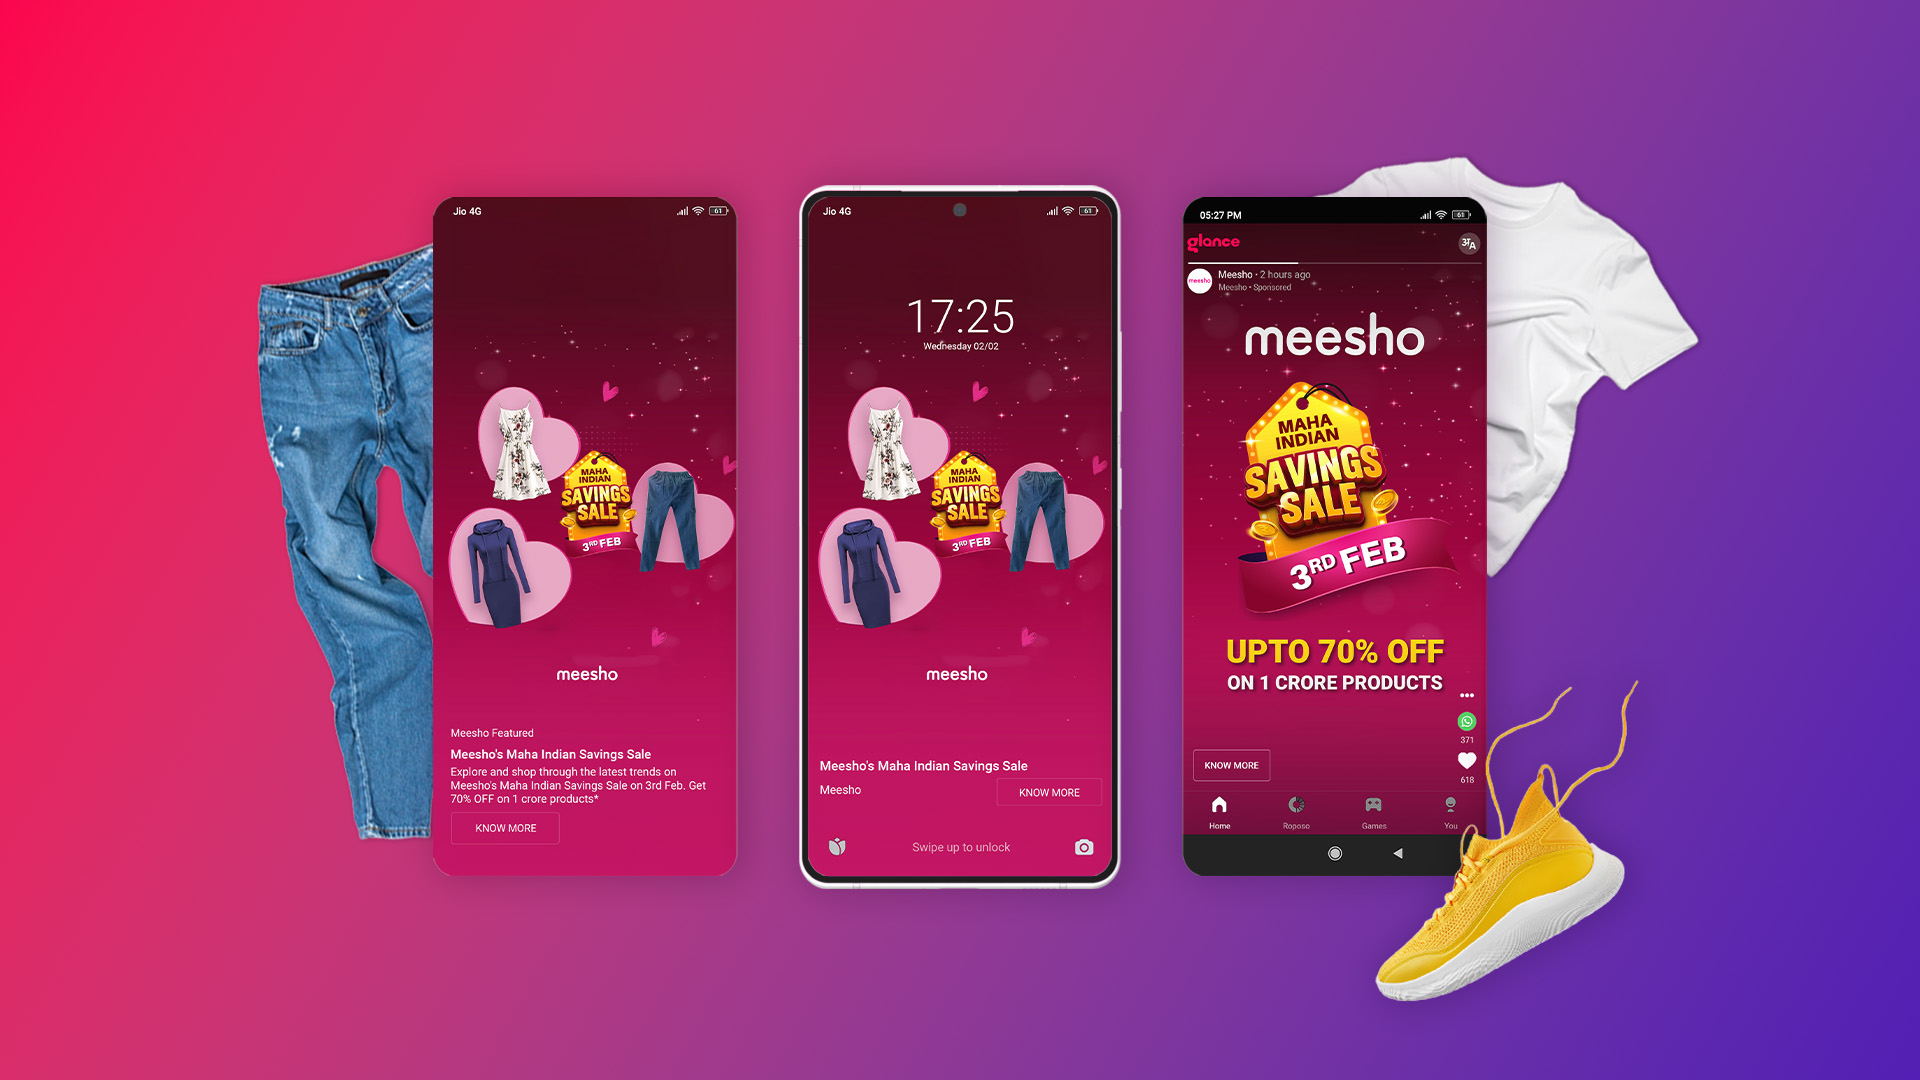 Meesho Makes Mobile Shopping Accessible and Affordable for Indians in a Glance